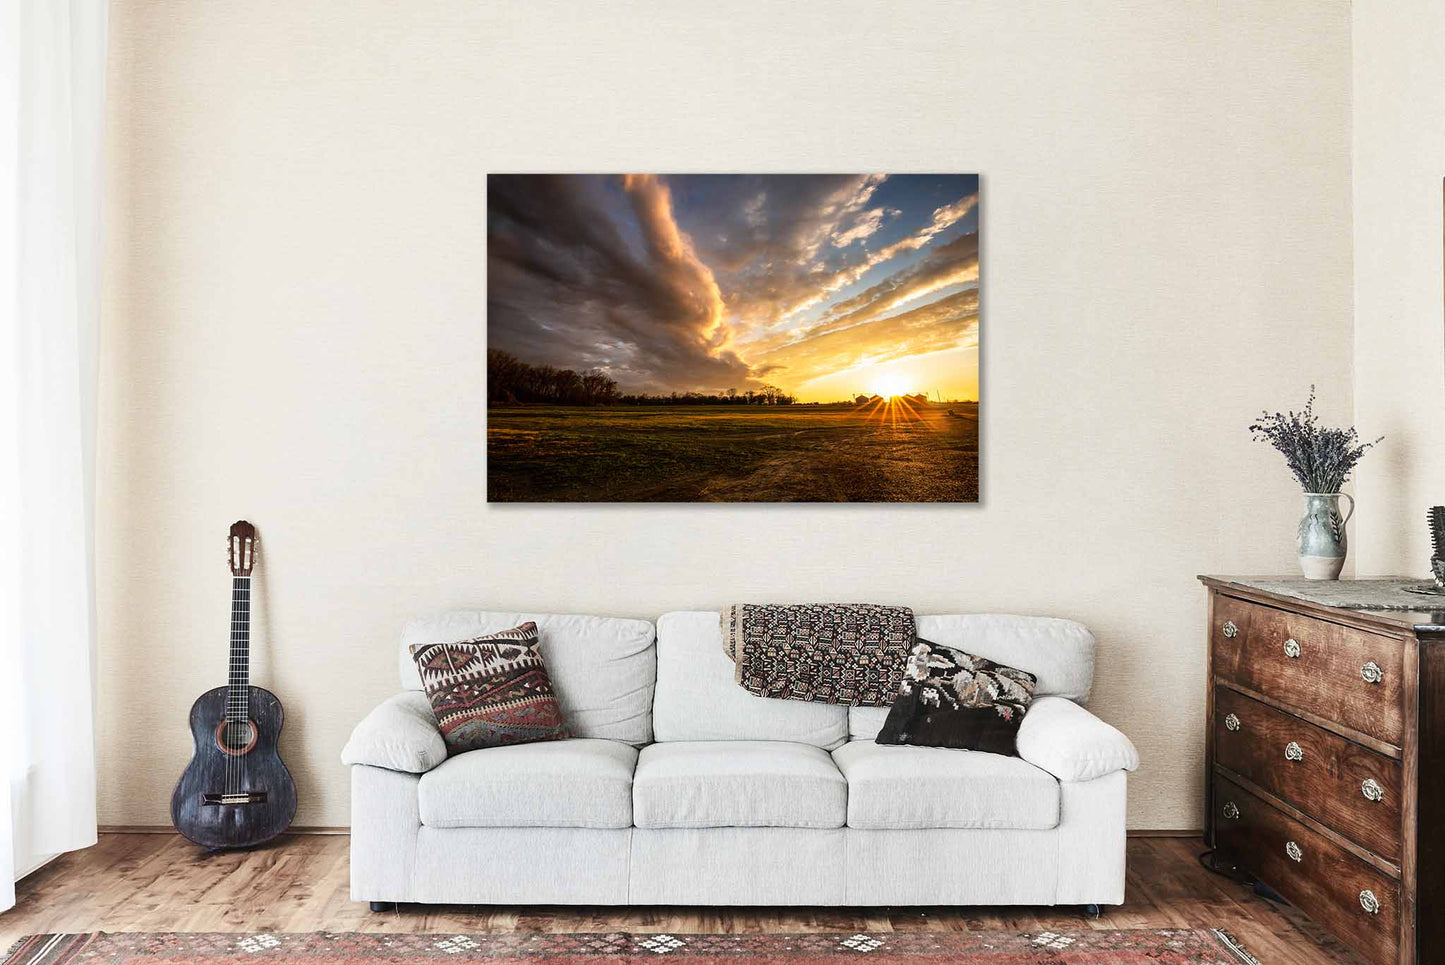 Southeastern Metal Print (Ready to Hang) Photo of Warm Sunset Over Farm in Mississippi Delta Mississippi Country Photography Southern Decor